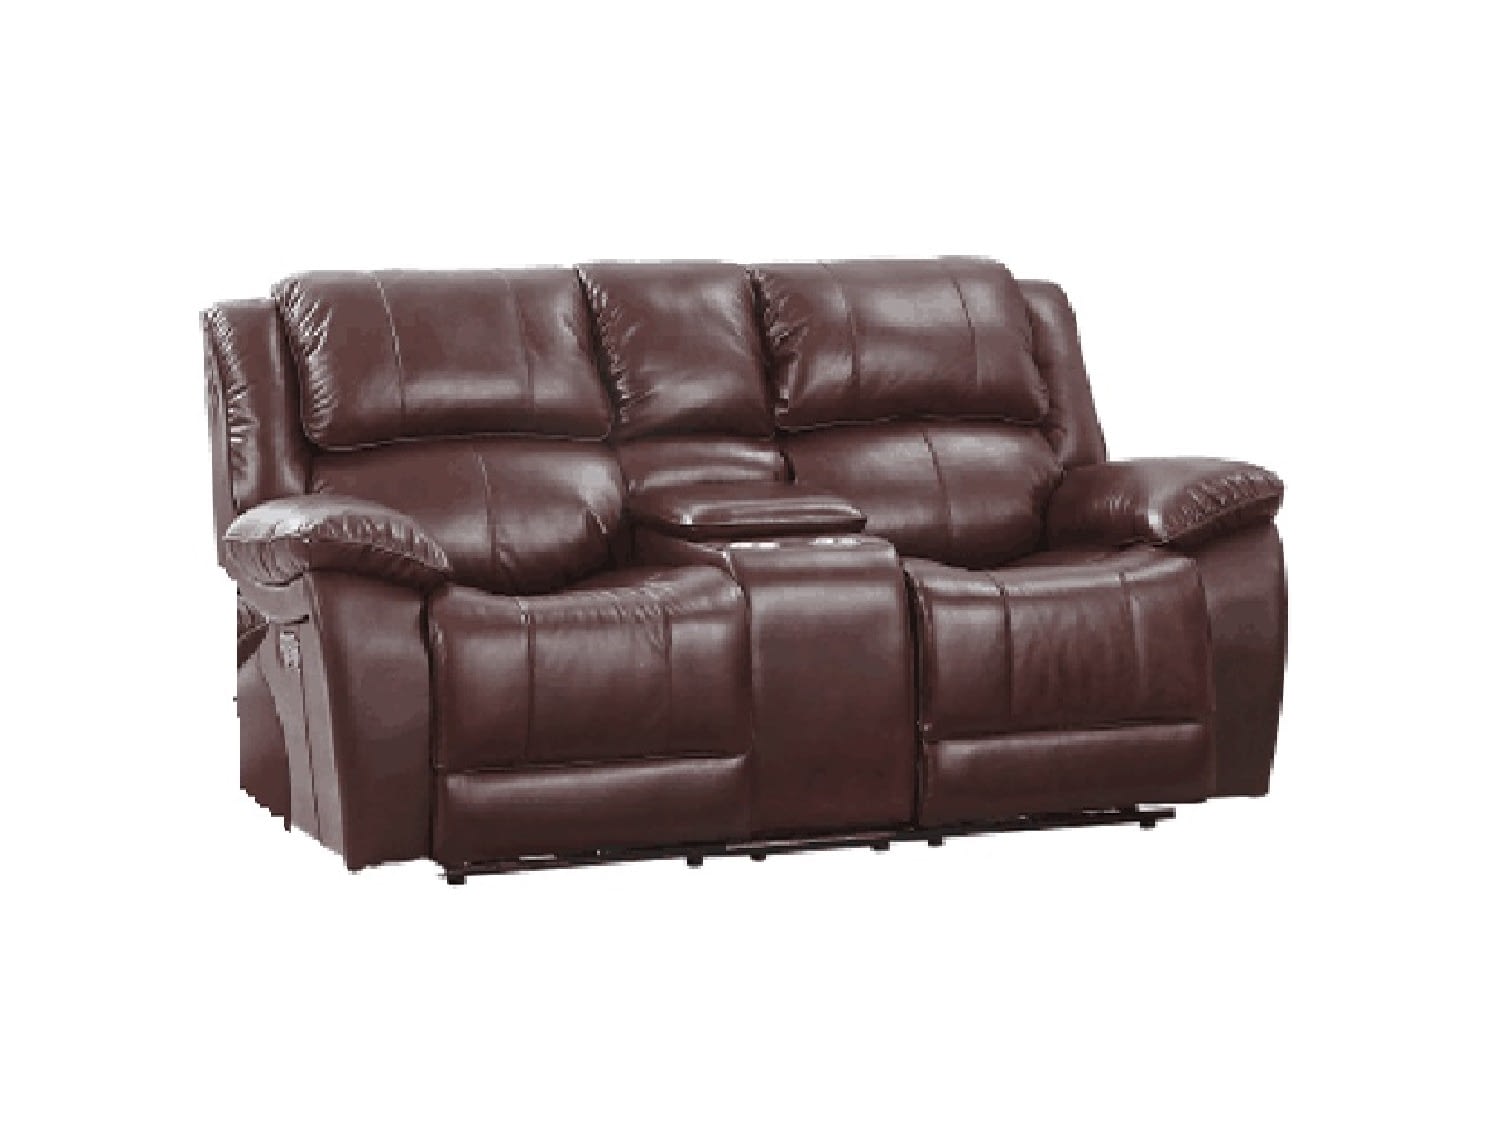 MONTCLARE Power Leather Reclining Love-seat with Console